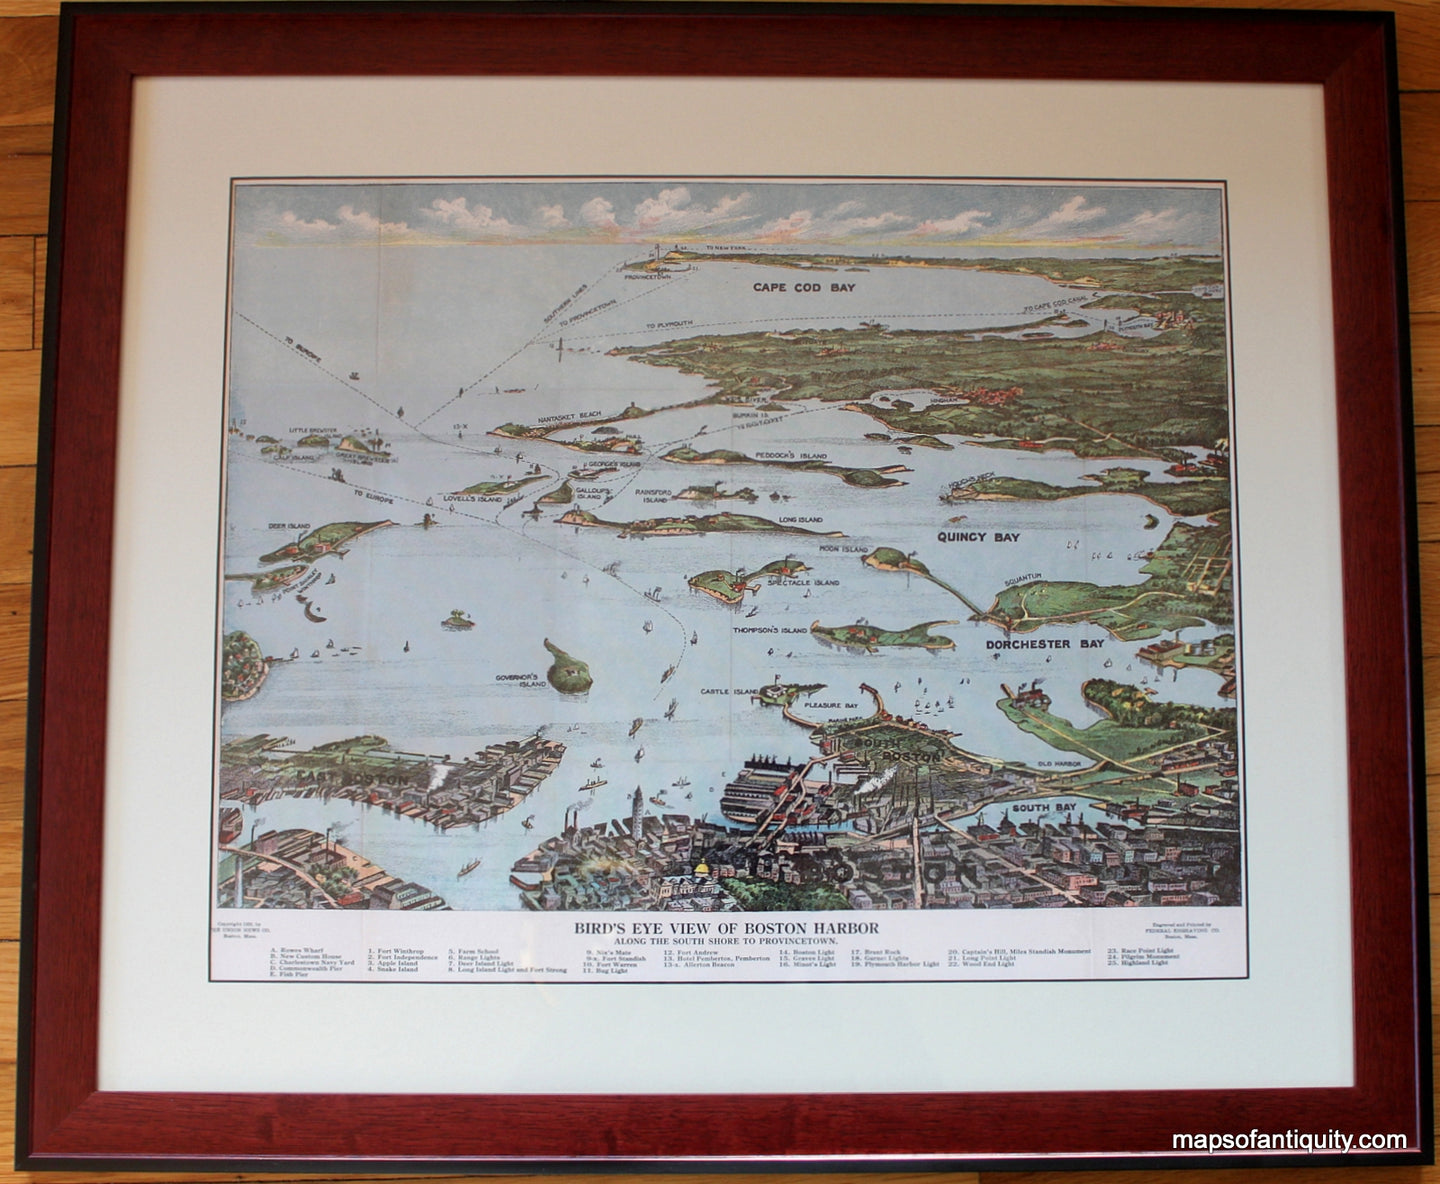 Framed-Reproduction-Bird's-Eye-View-of-Boston-Harbor---Reproduction-Holiday-Gift-Framed-Reproduction-Reproduction--Maps-Of-Antiquity